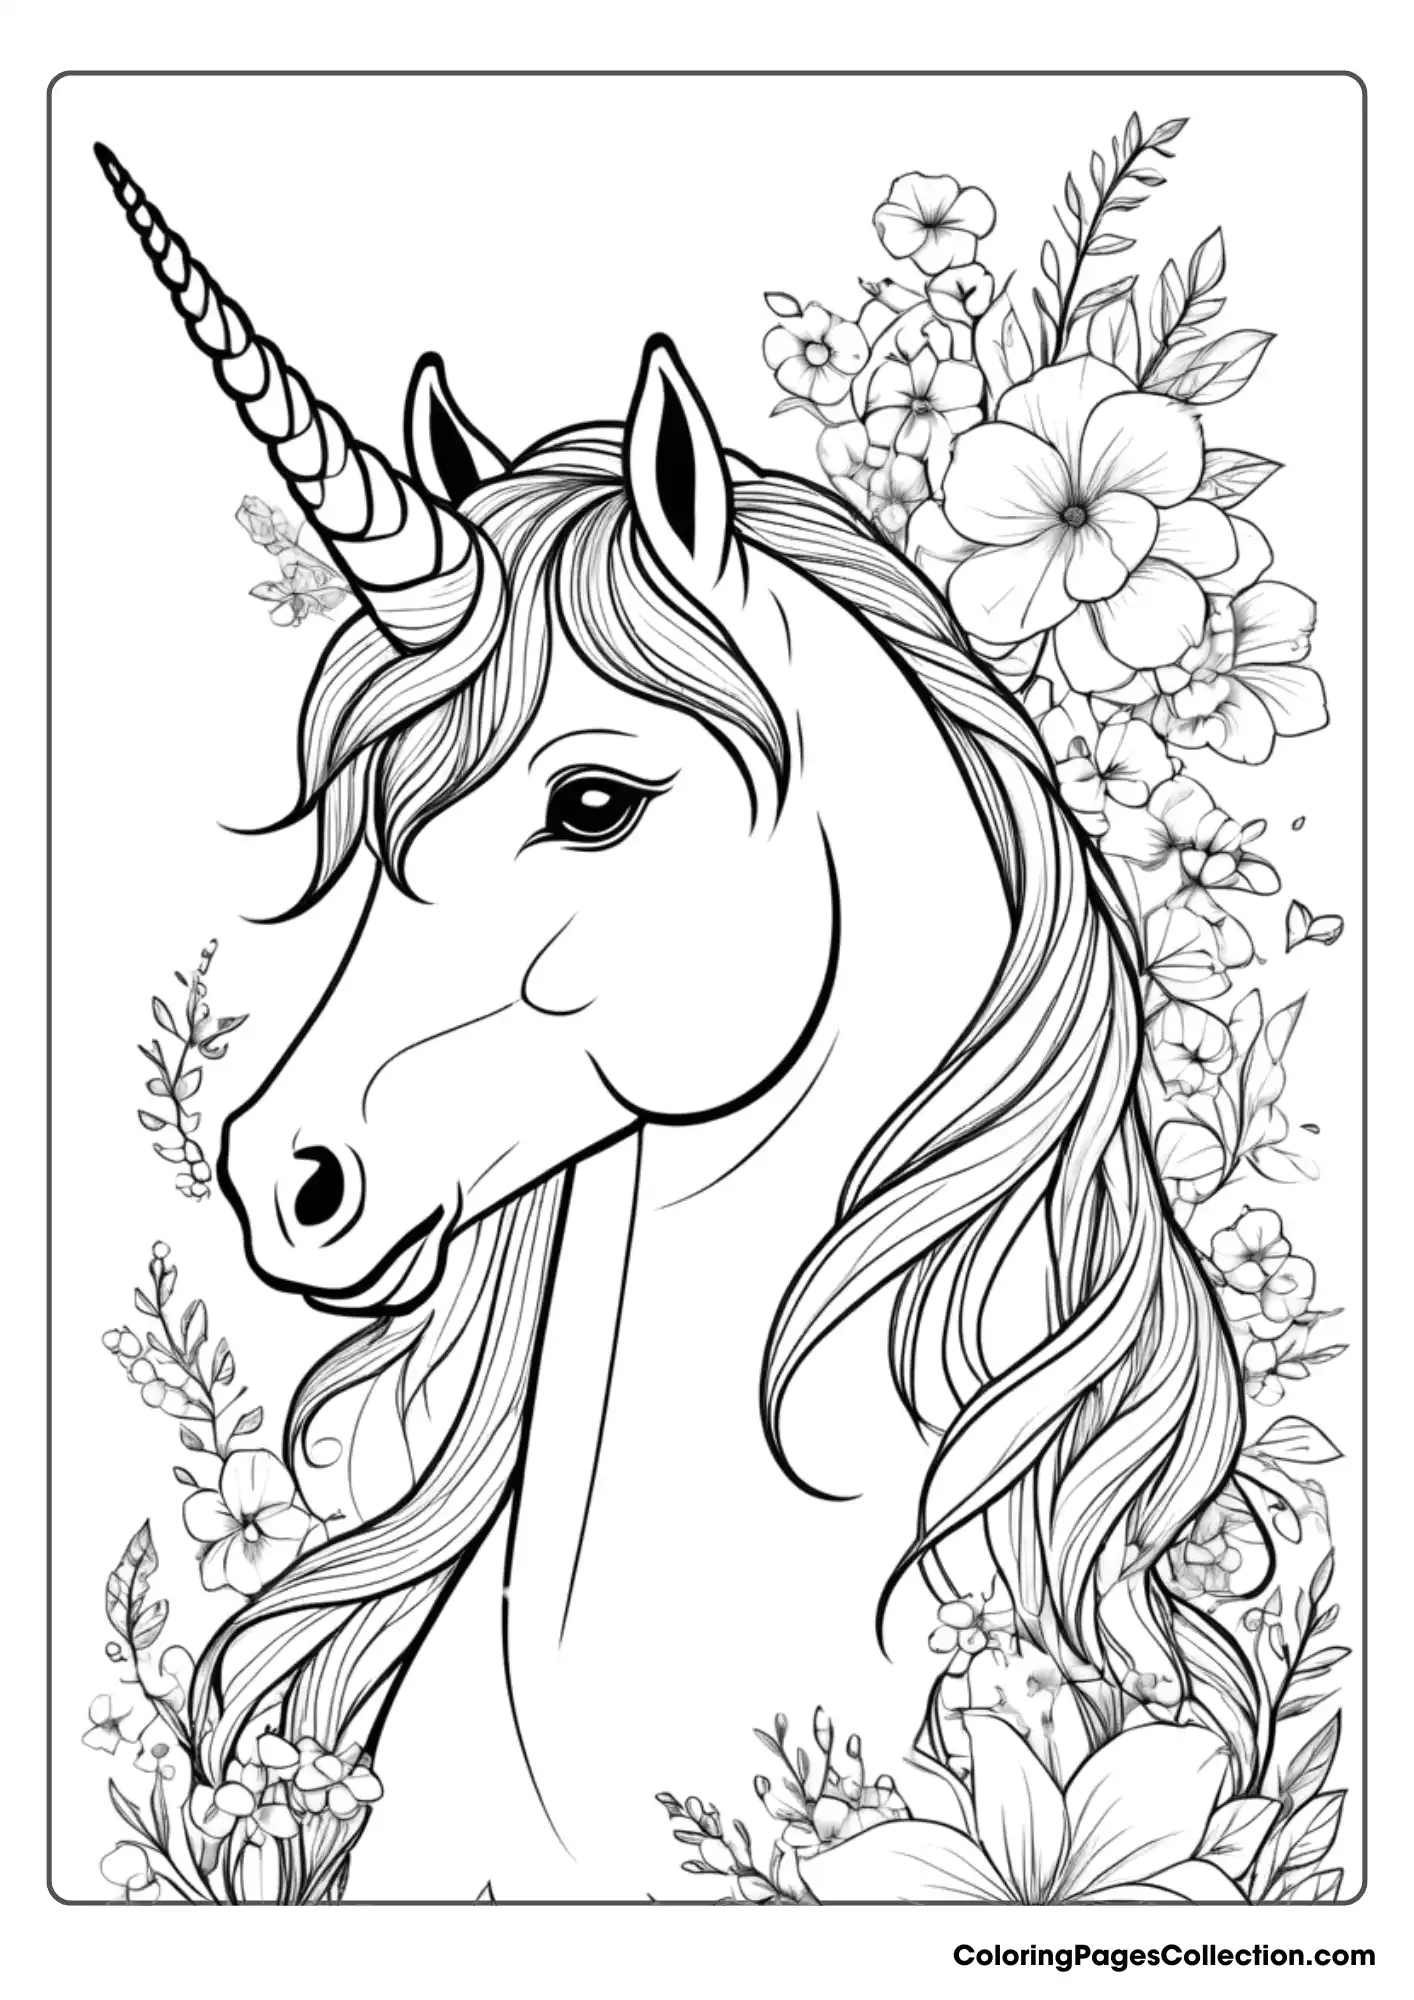 Coloring pages for teens, Beautiful Unicorn